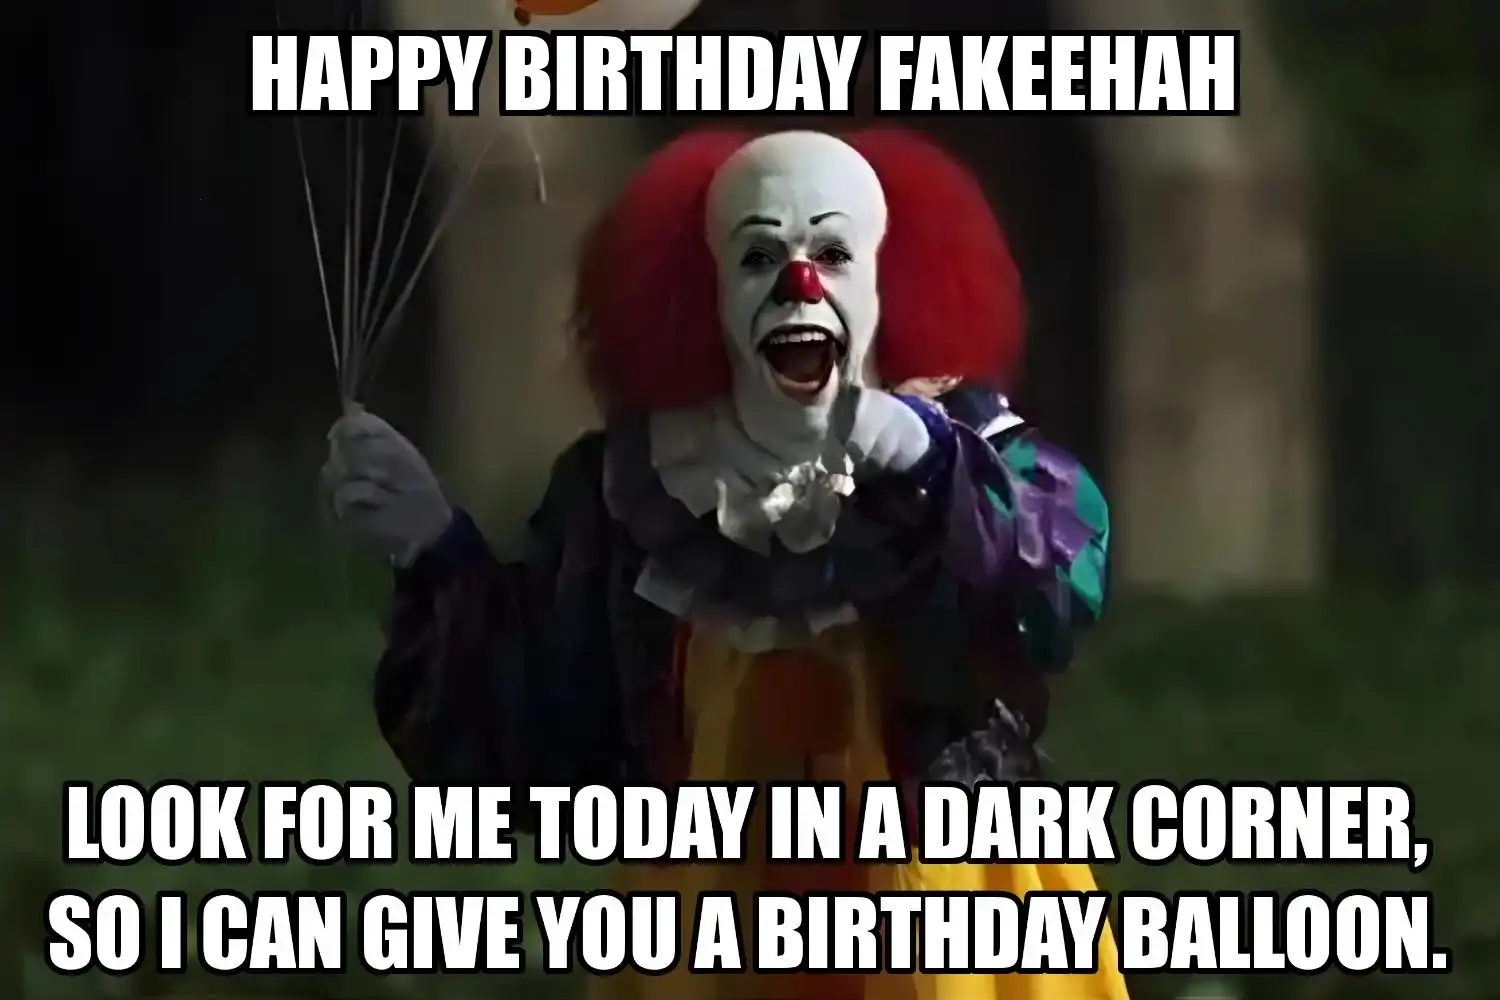 Happy Birthday Fakeehah I Can Give You A Balloon Meme